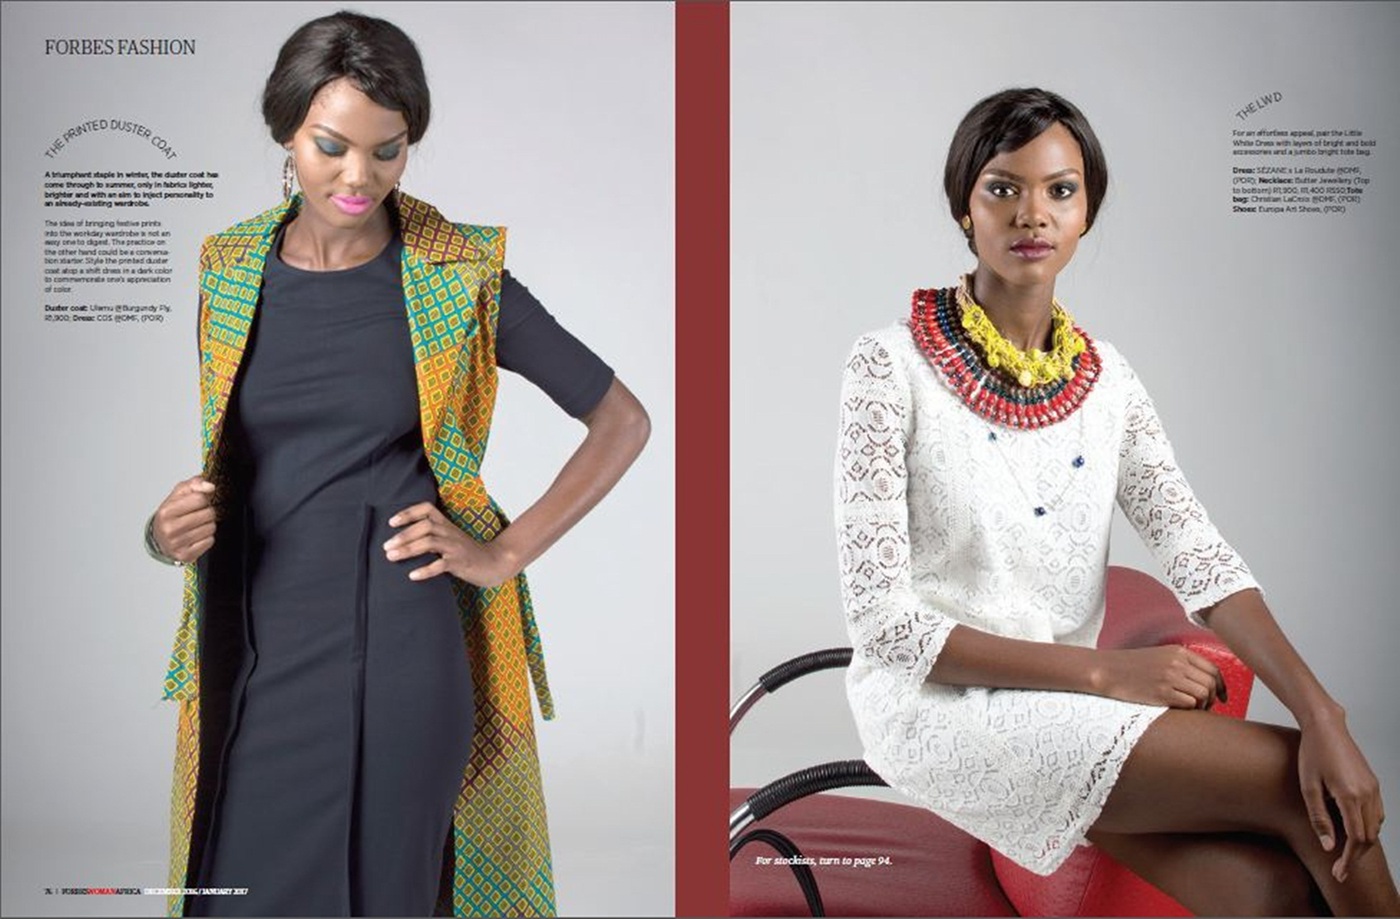 Forbes Forbes Africa fashion styling African Stylist Fashion  African Fashion South African Stylist African Magazines